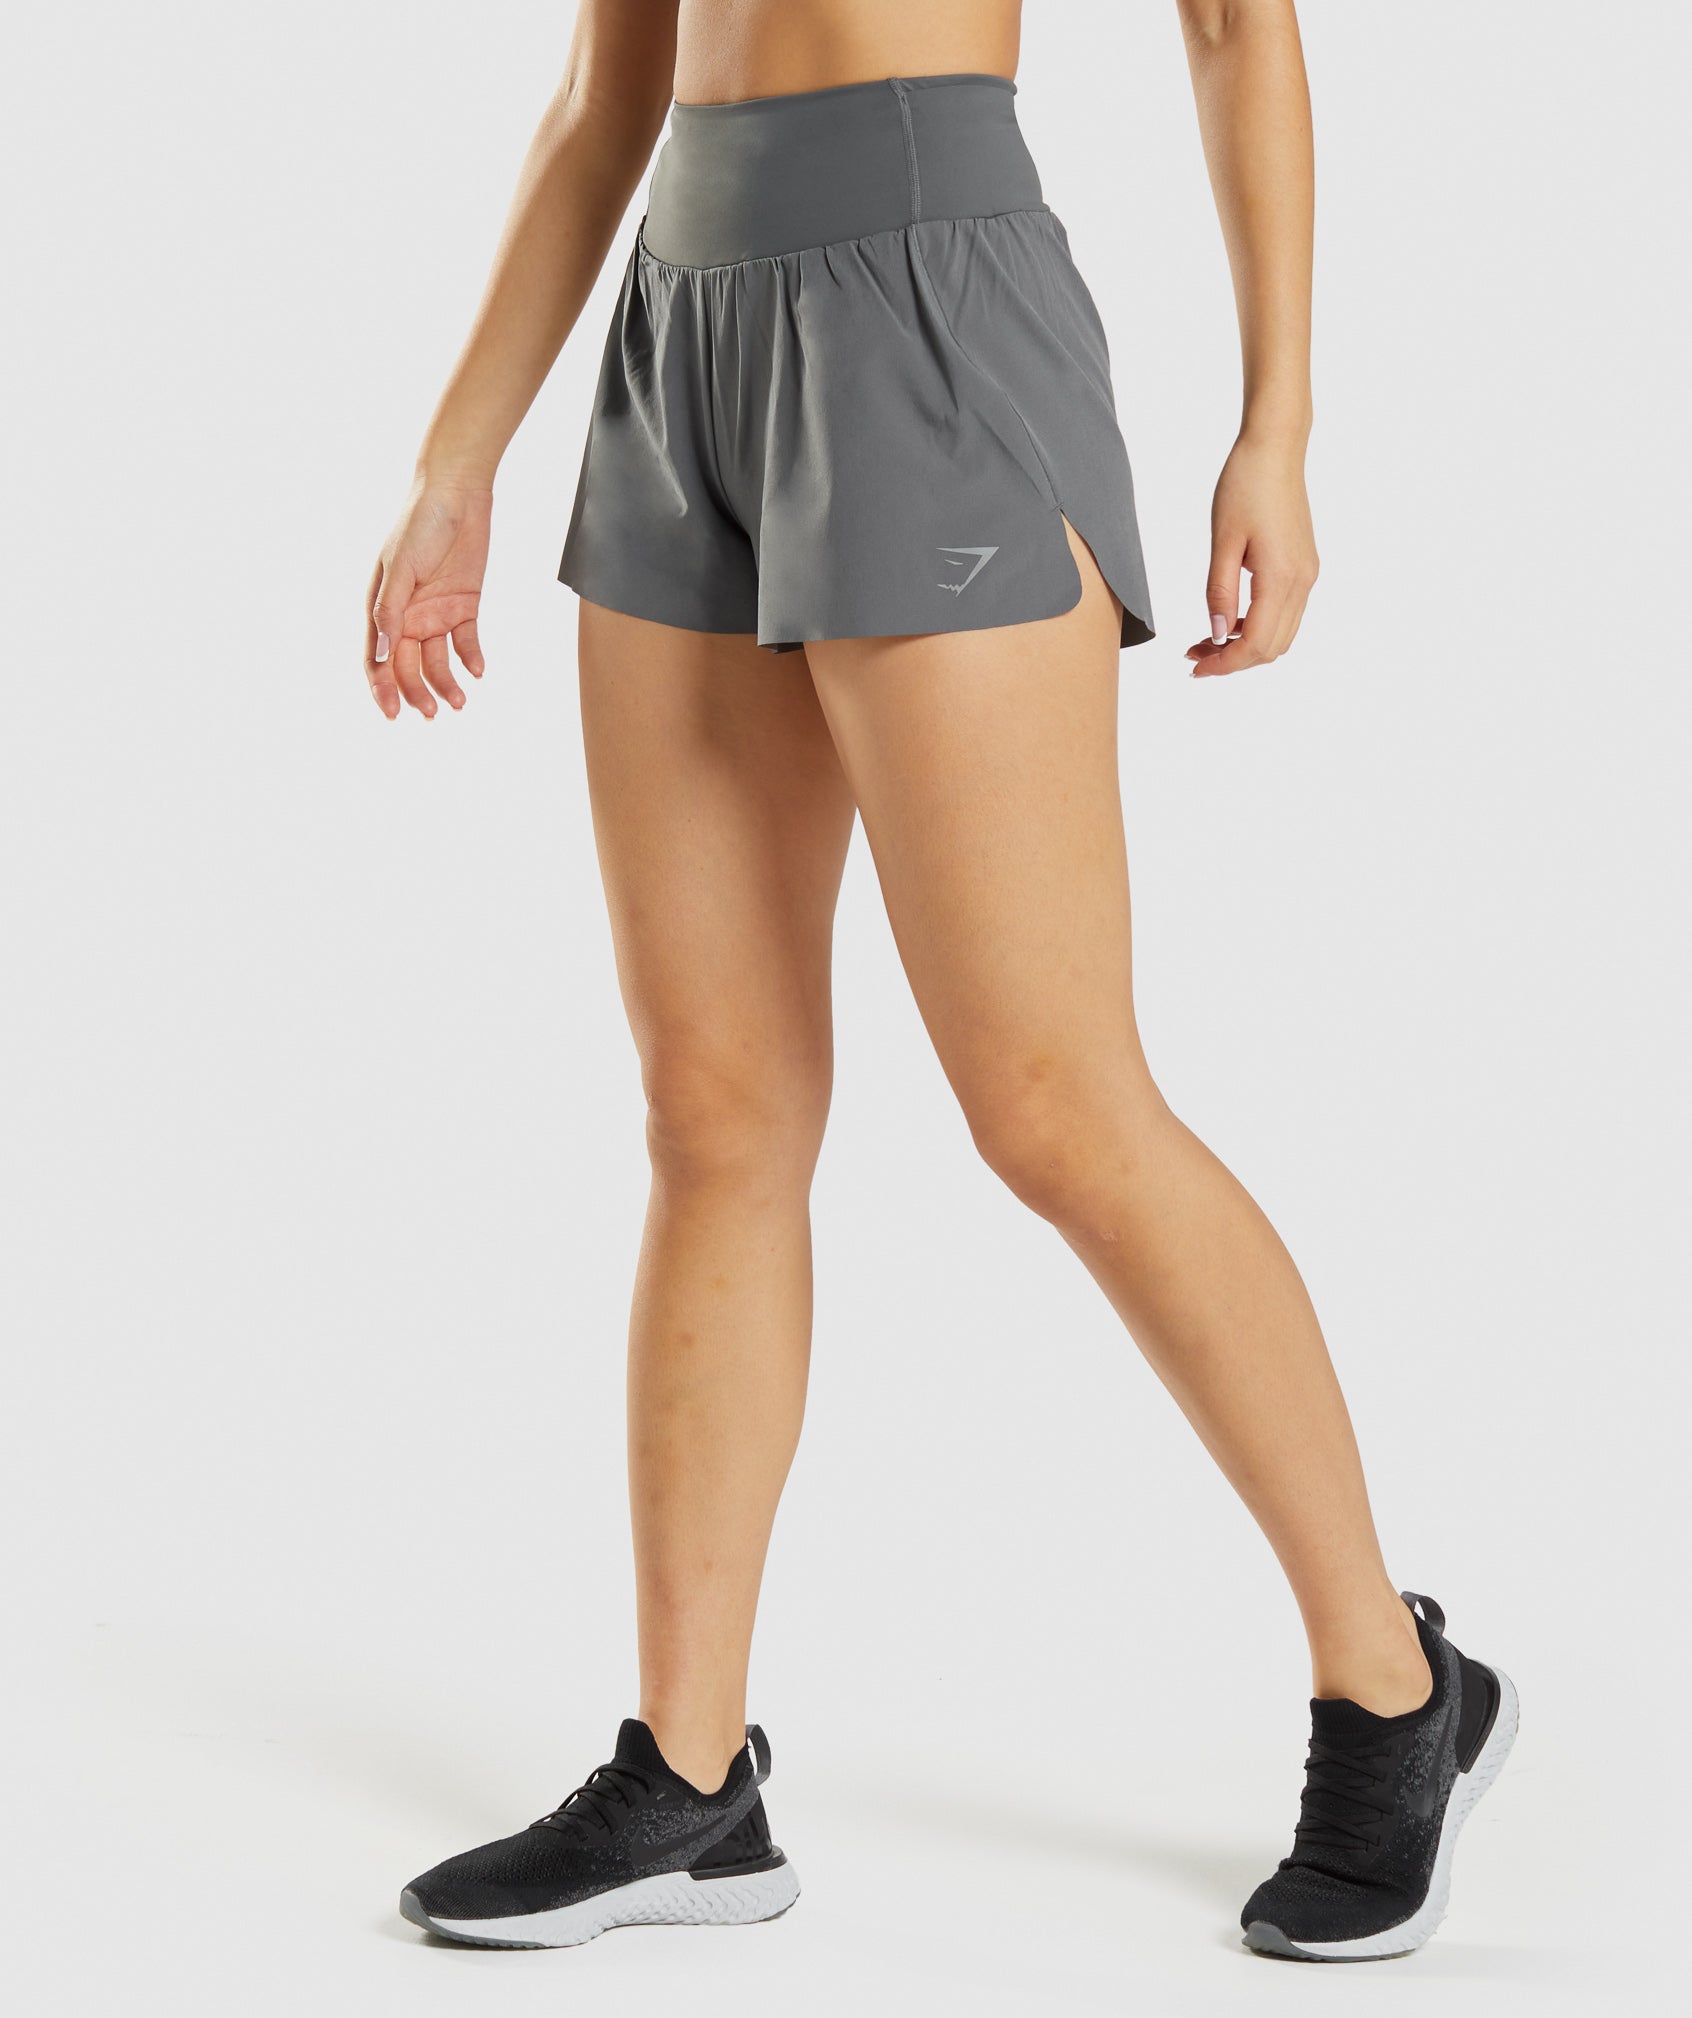 Speed Shorts in Grey - view 1